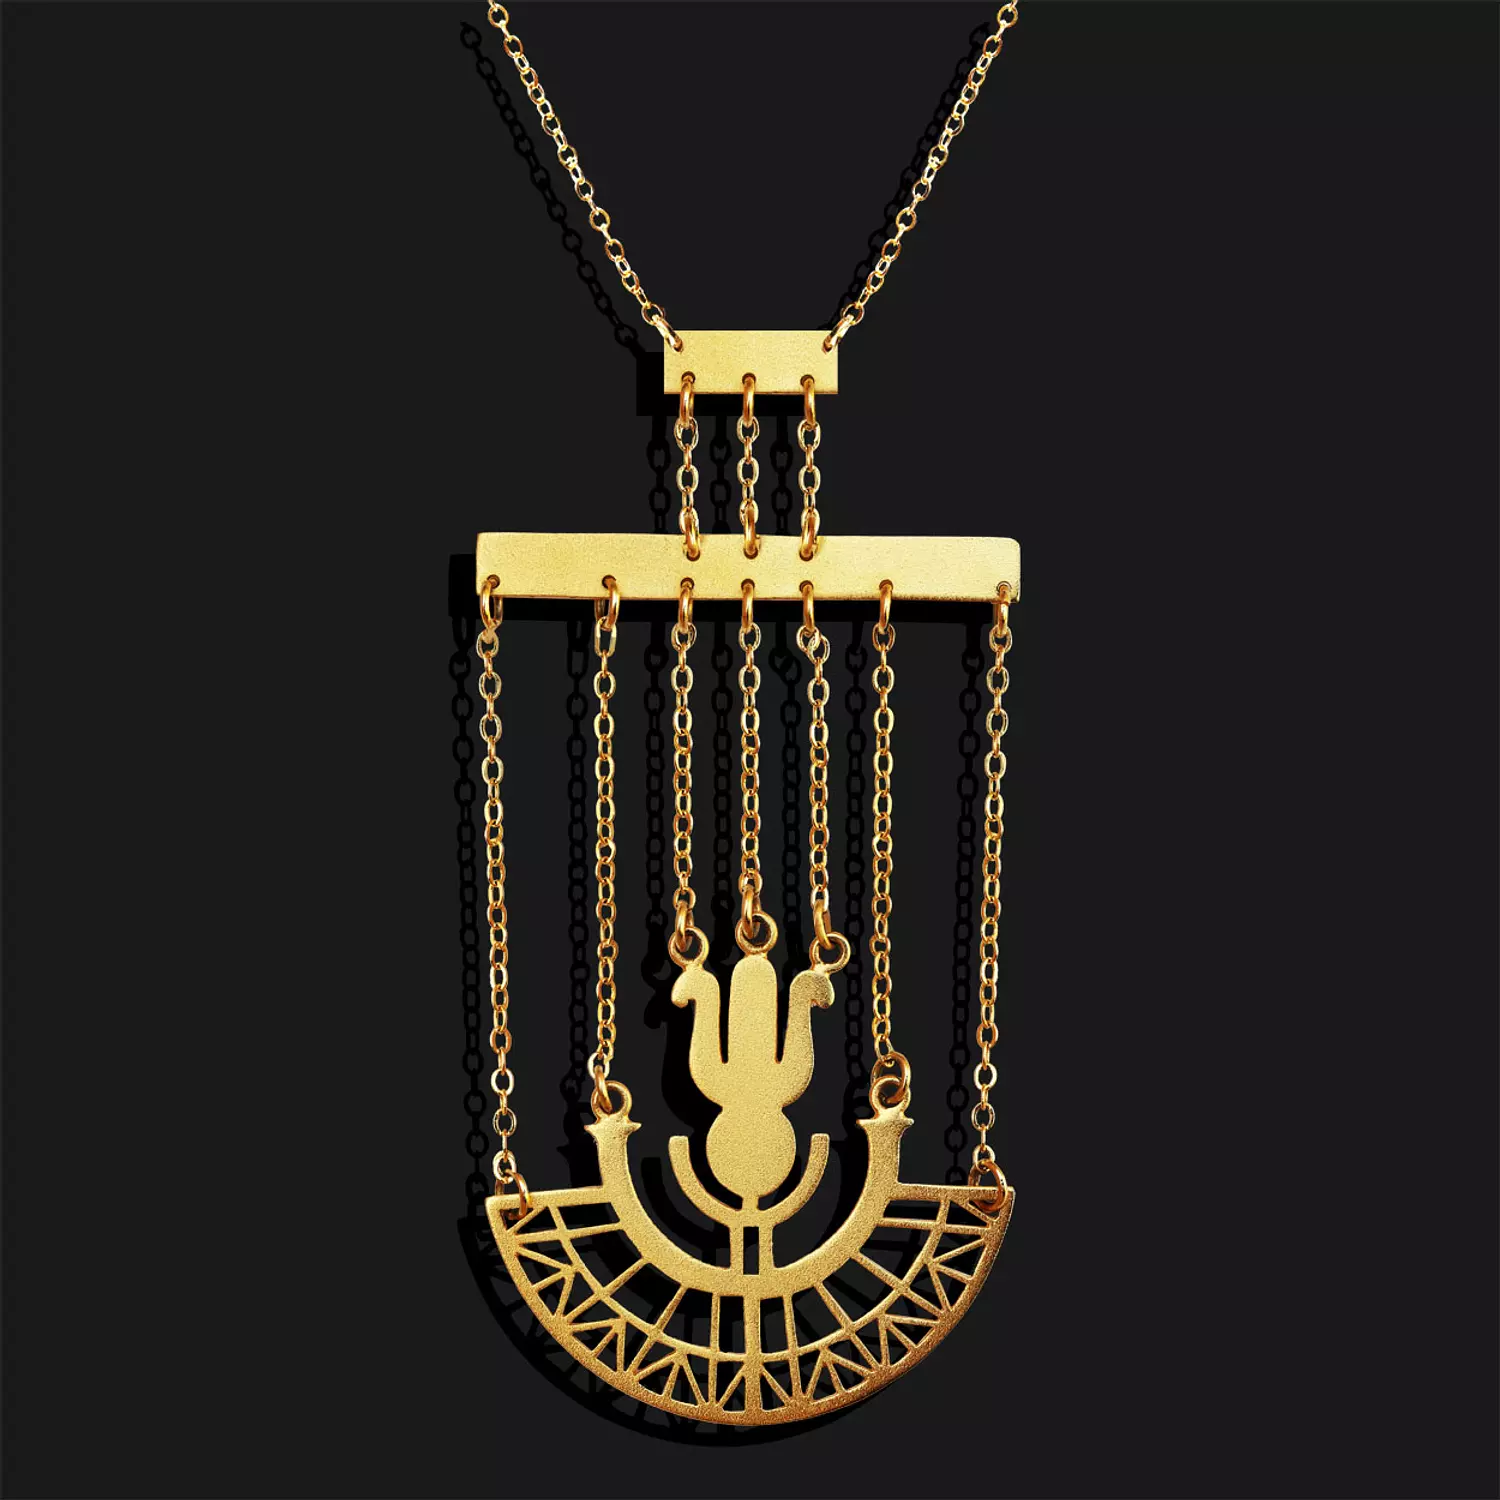 Lotus necklace hover image